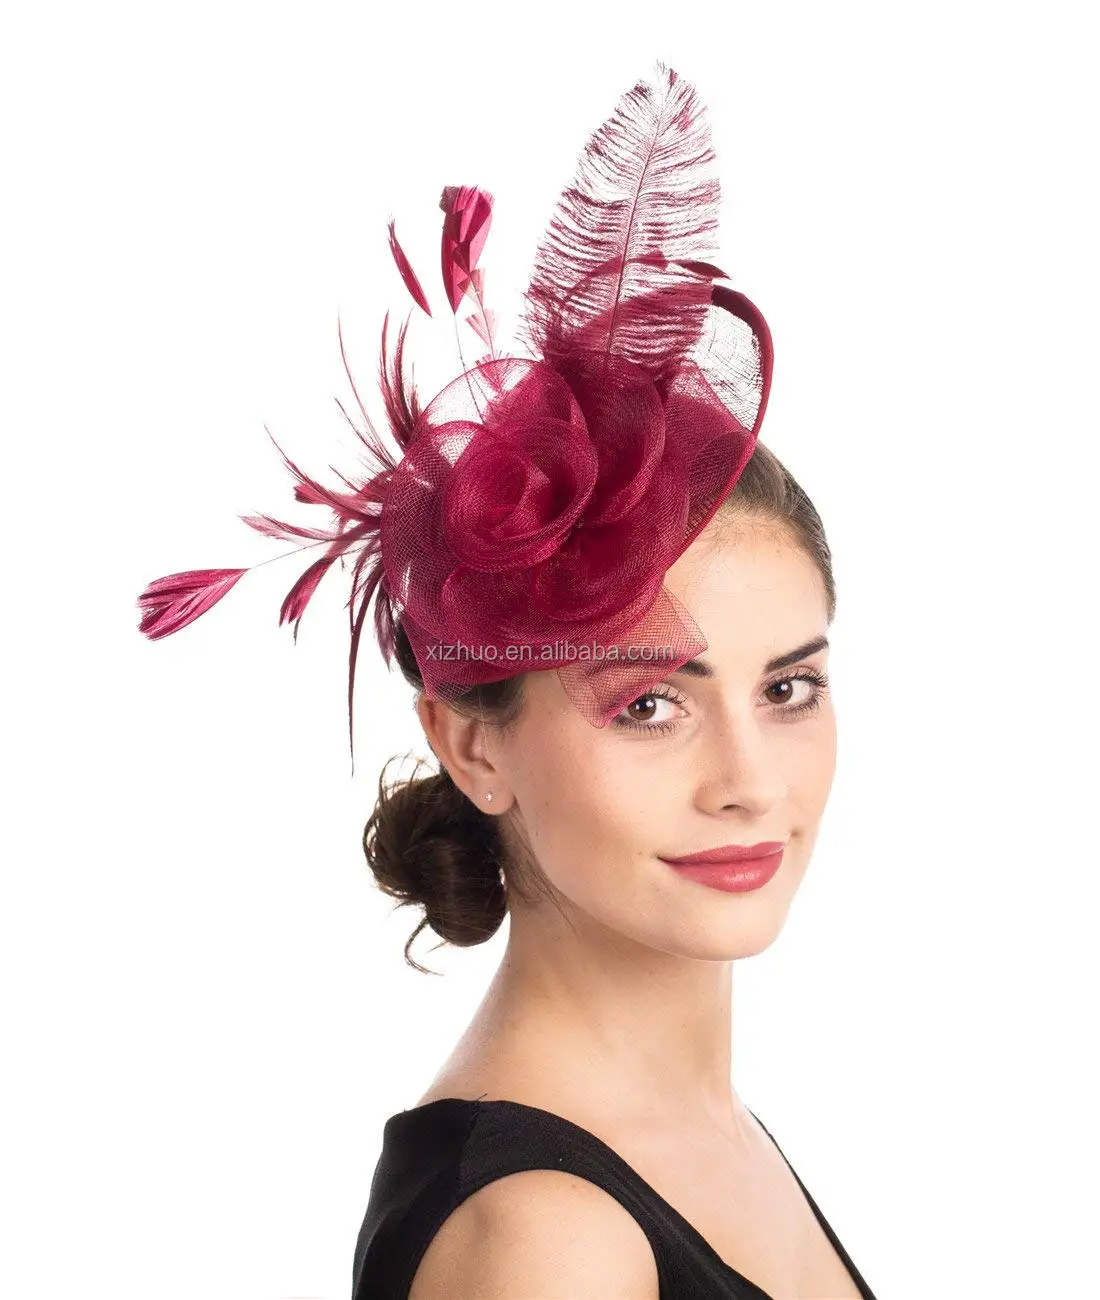 SAFERIN Fascinators Hat Sinamay Flower Mesh Feathers on a Headband and a Clip Tea Party Headwear for Girls and Women 